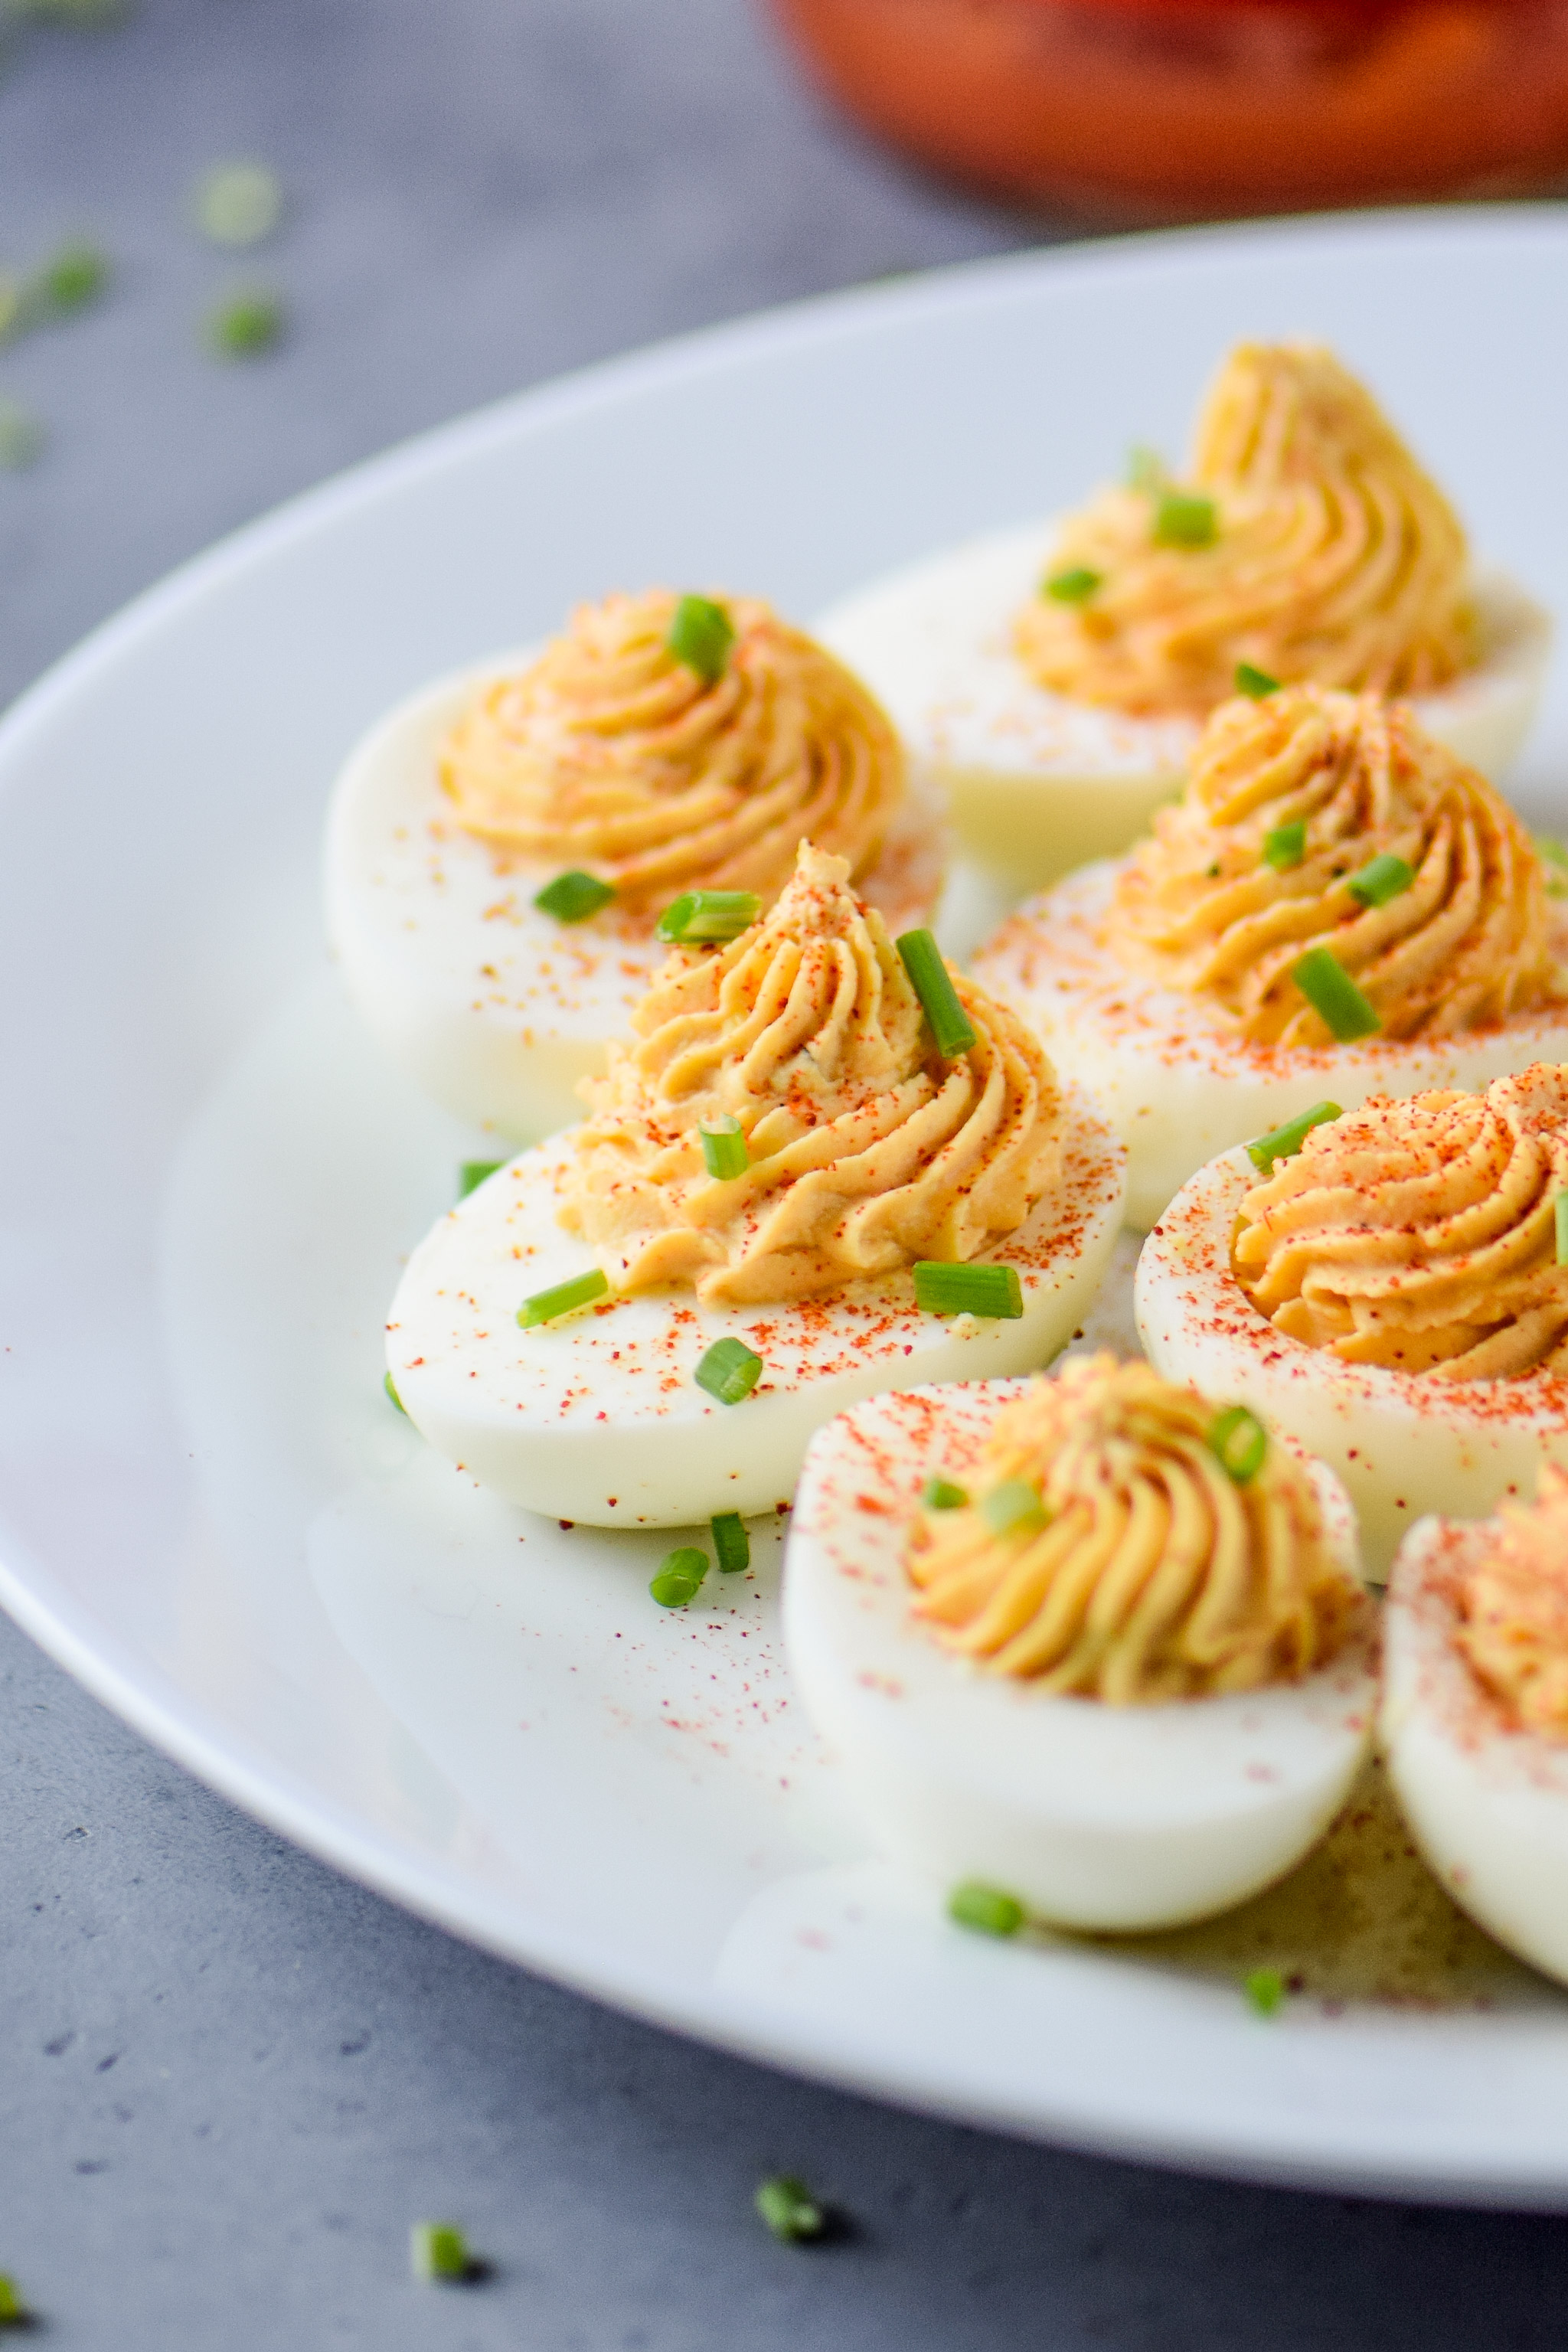 Whole30 Buffalo Deviled Eggs pictured on a plate with smoked paprika and sliced green onions.